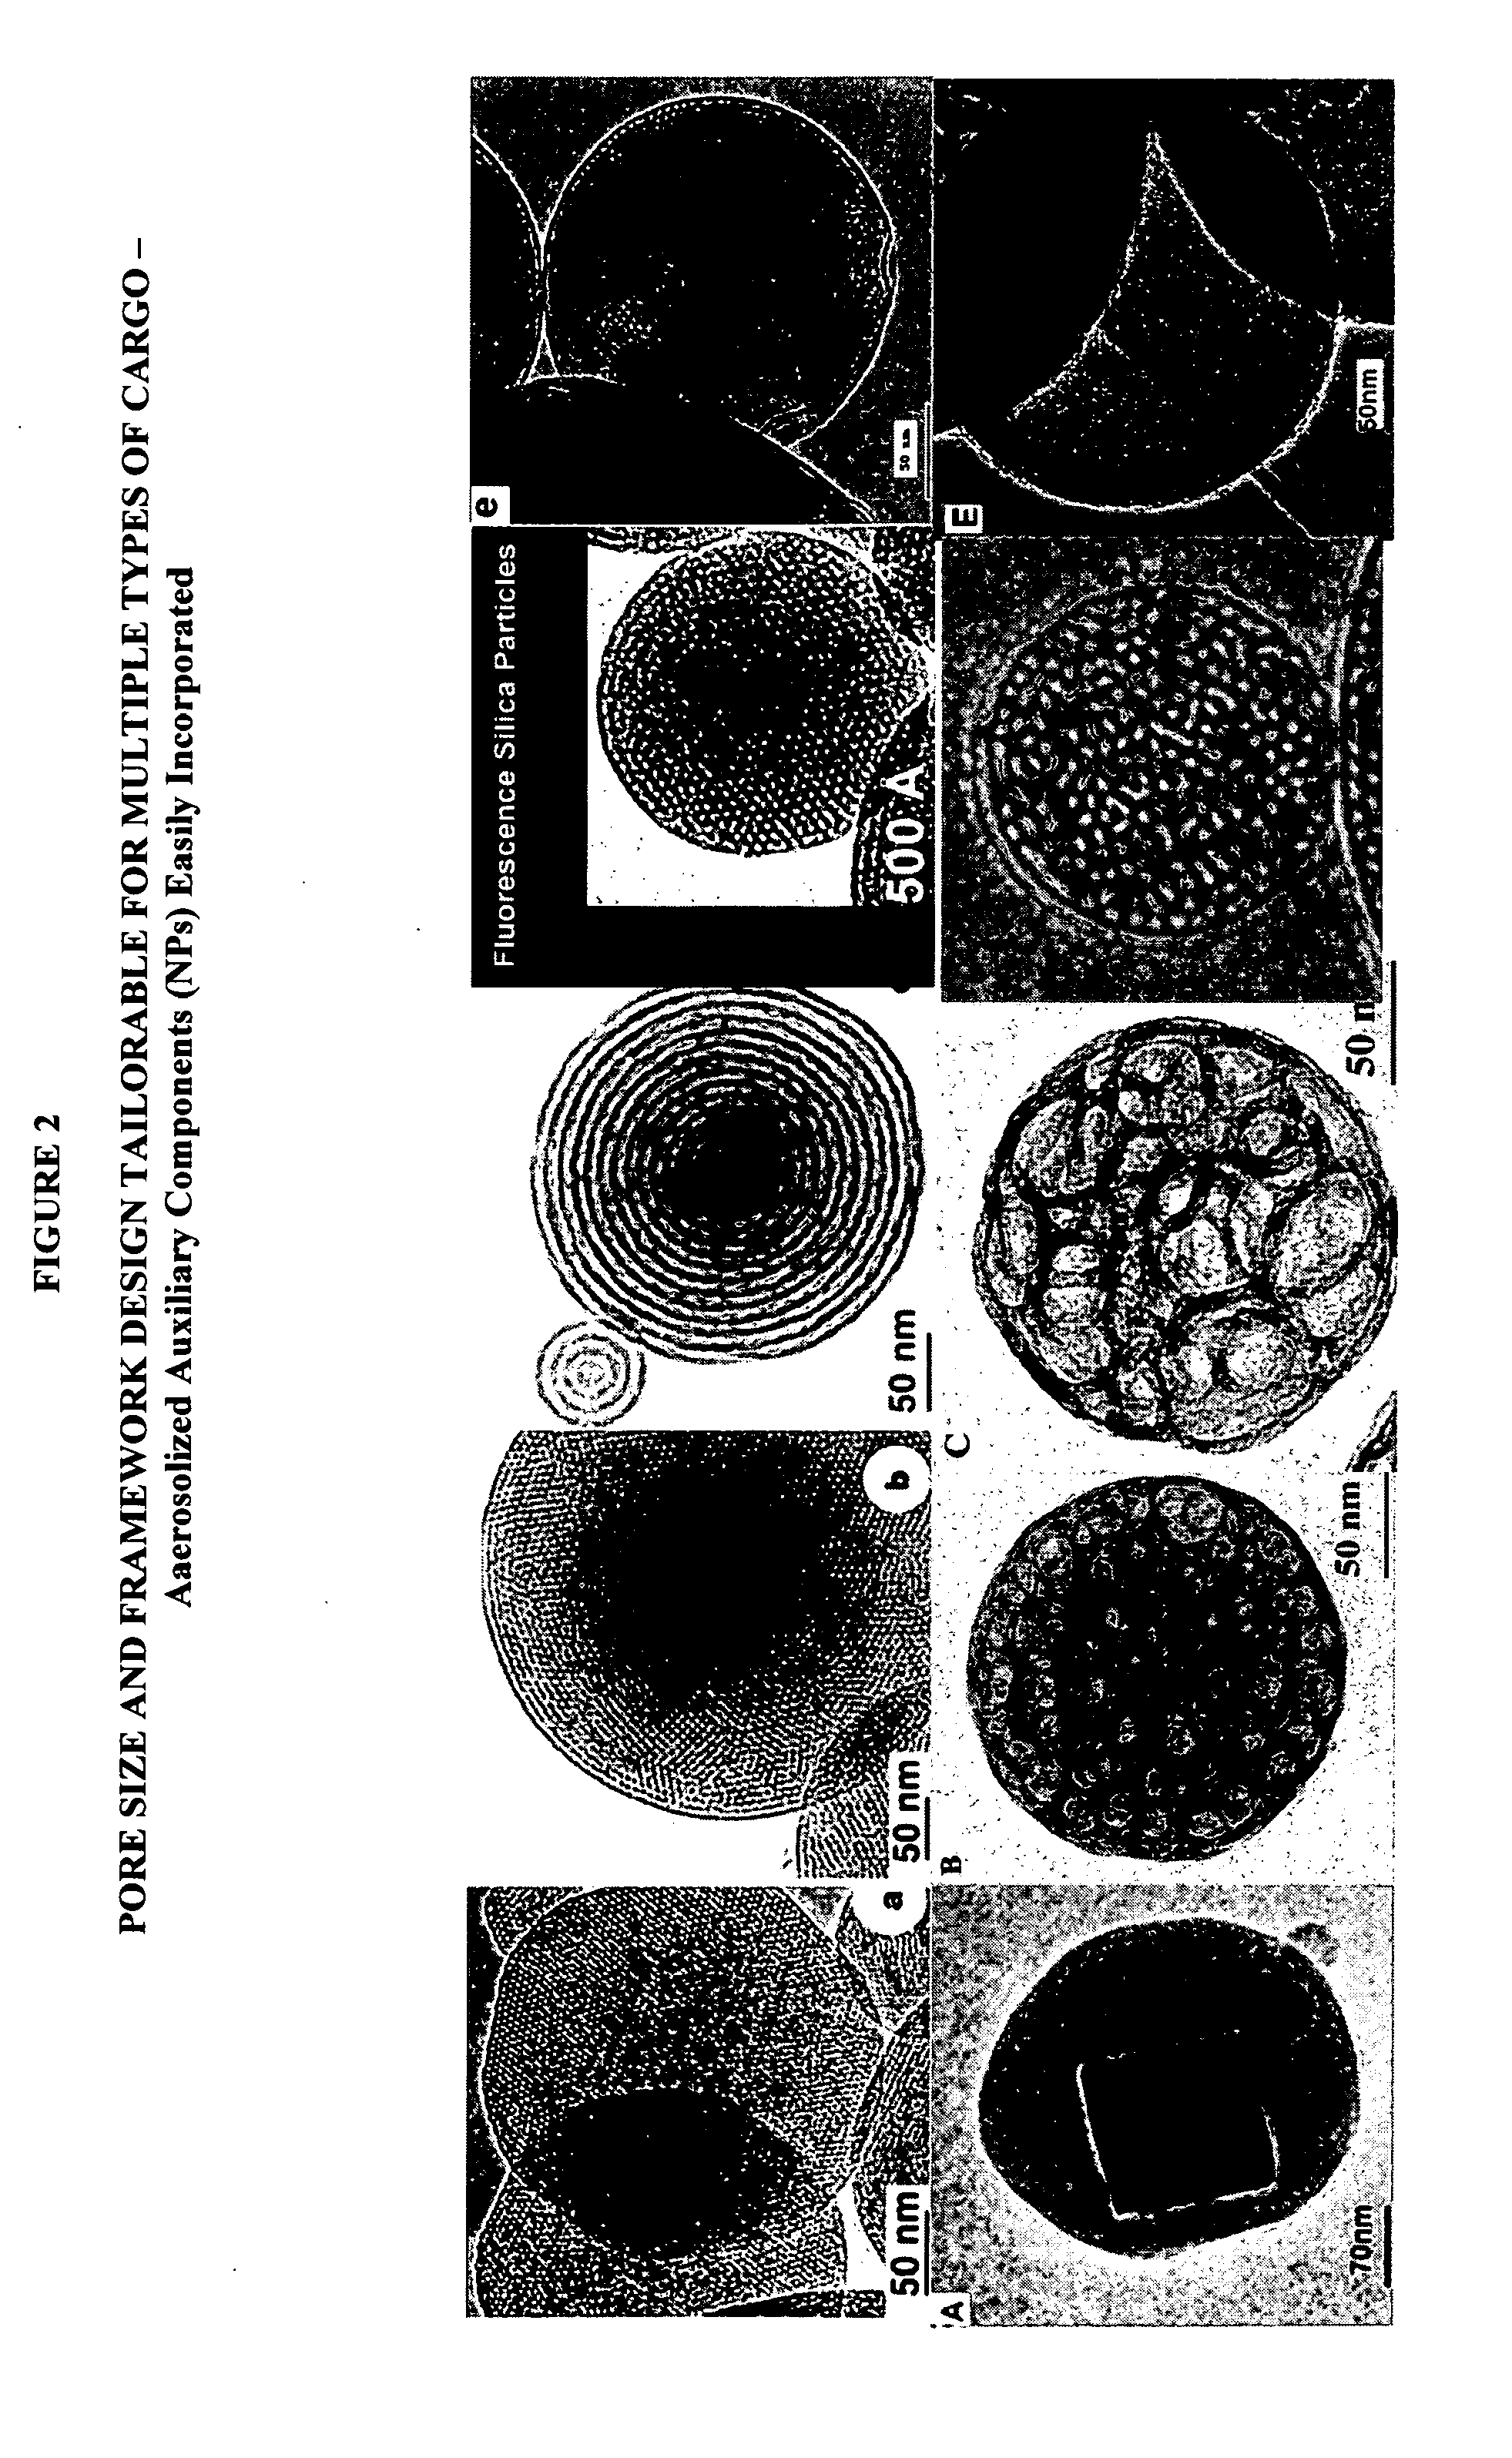 Porous nanoparticle-supported lipid bilayers (protocells) for targeted delivery and methods of using same